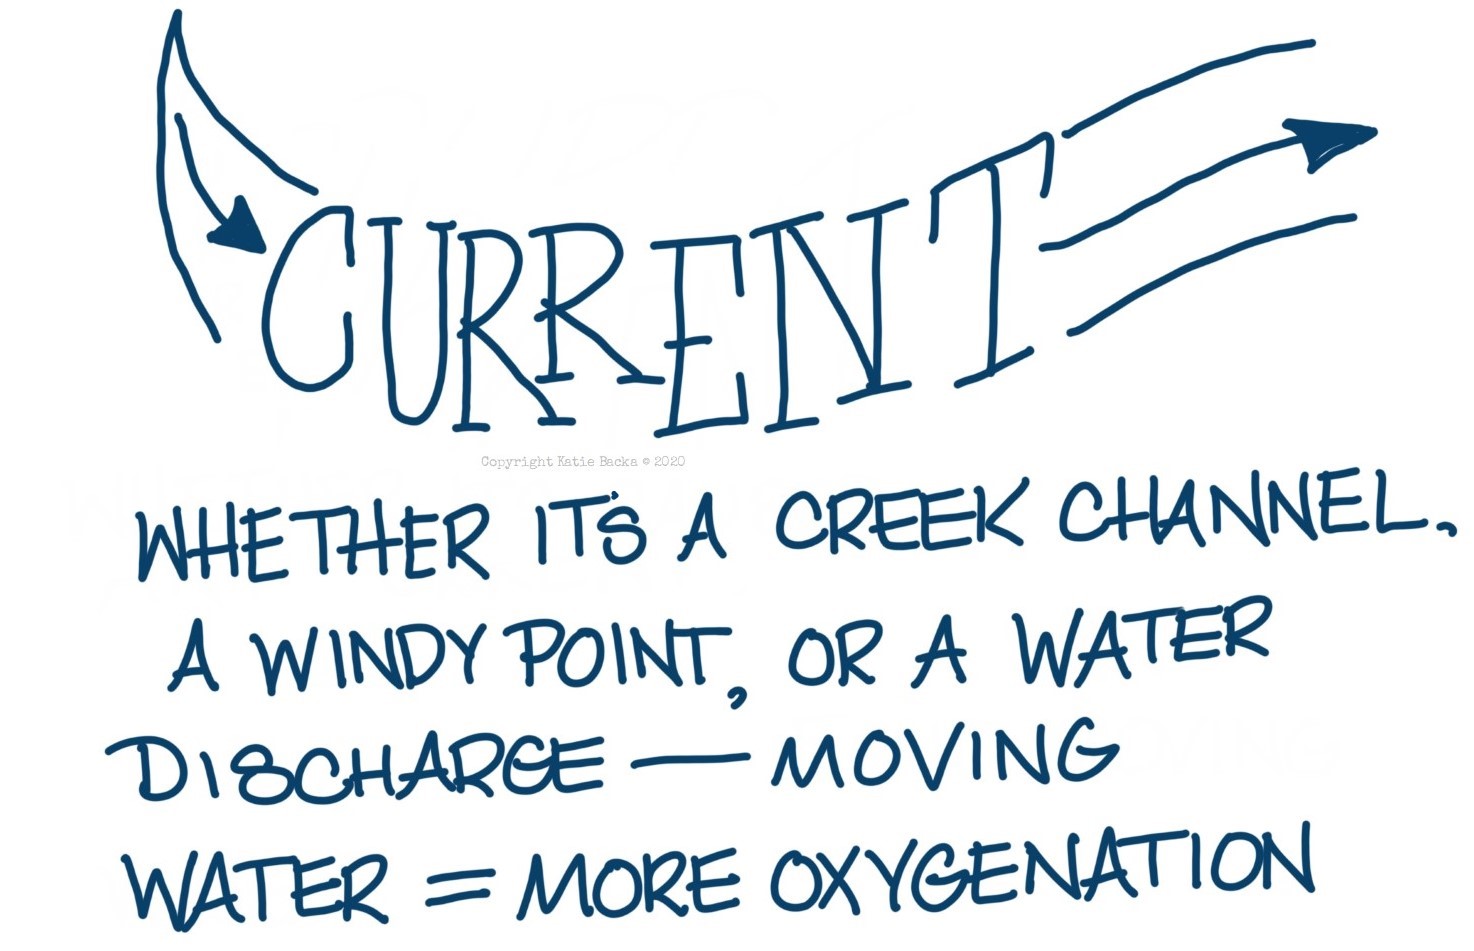 text: current: whether it's a creek channel, a windy poiunt, or a water discharge - moving water = more oxygenation